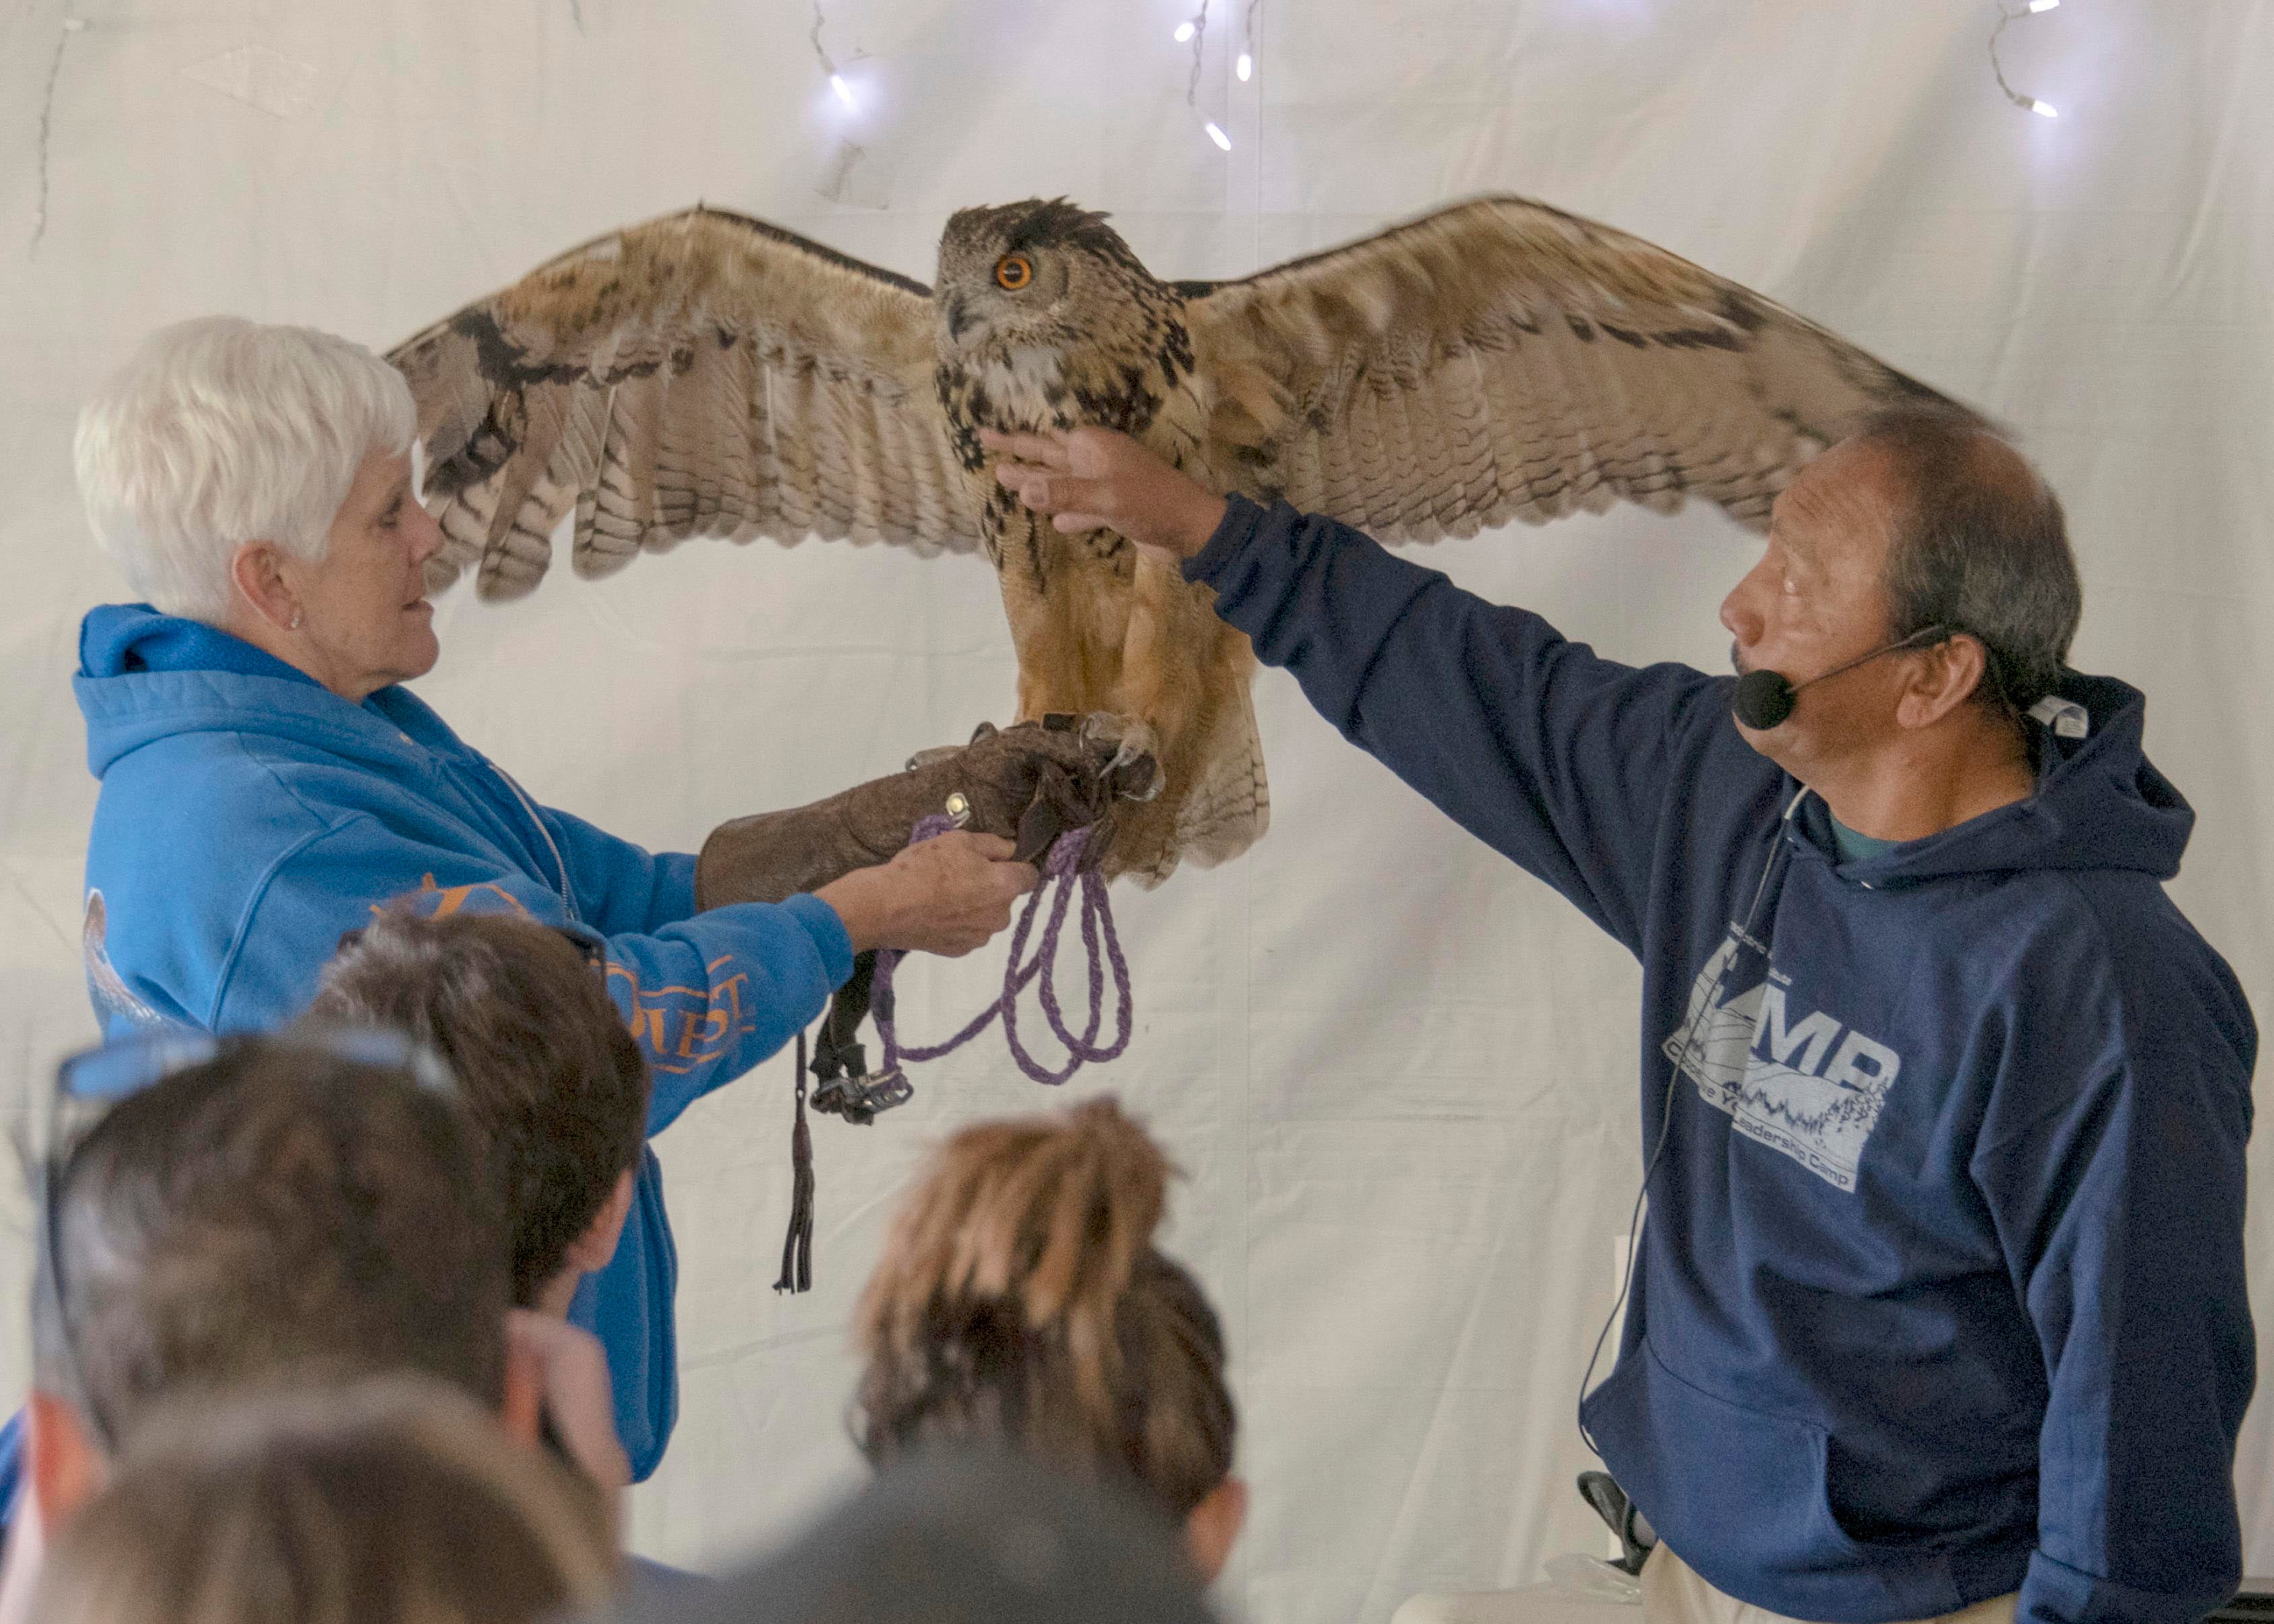 While attending camp, students learn about local wildlife like the owl shown in the image.